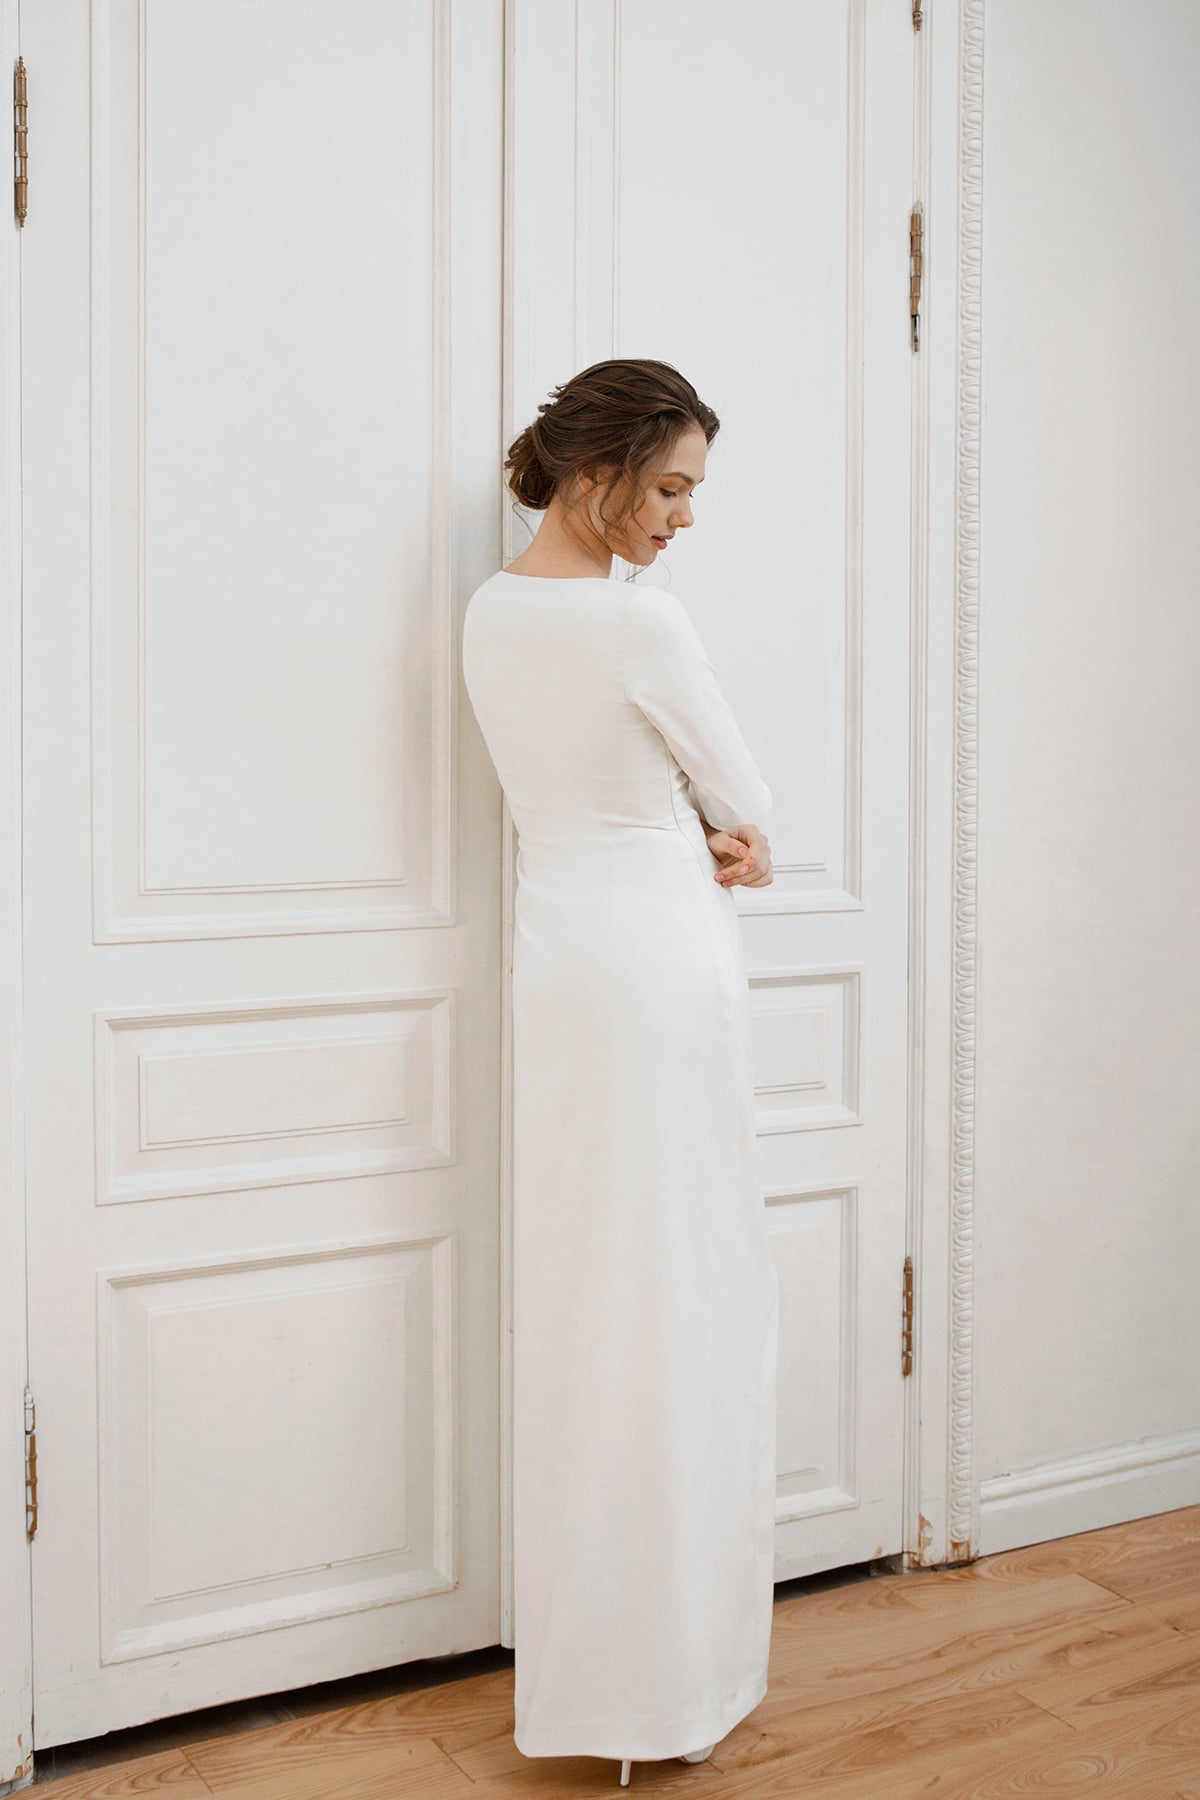 Sexy wedding dress with square neckline • simple wedding dress • crepe wedding dress • reception dress • long sleeve dress